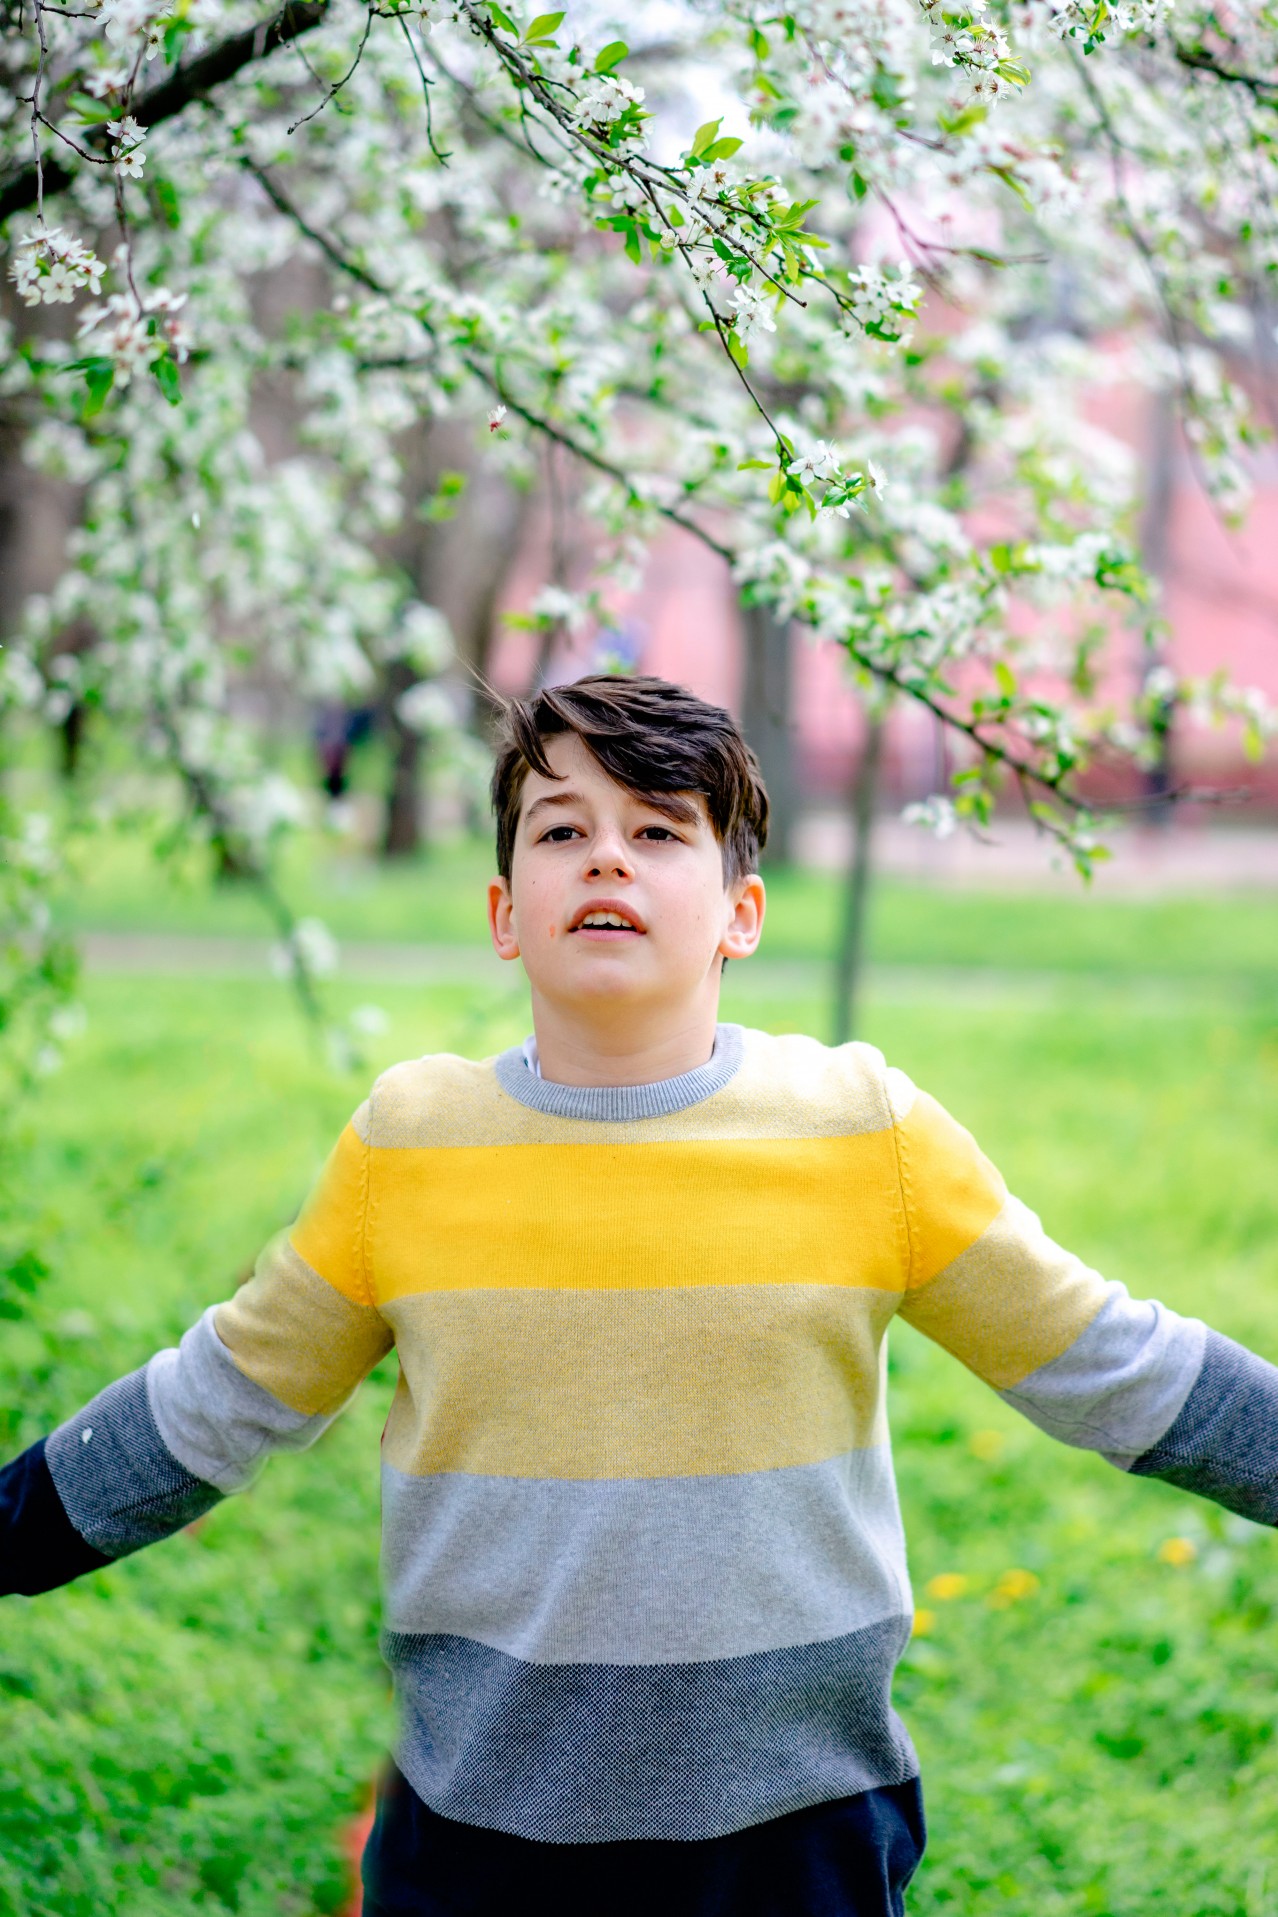 Boy in a sweater posing under blooming tree